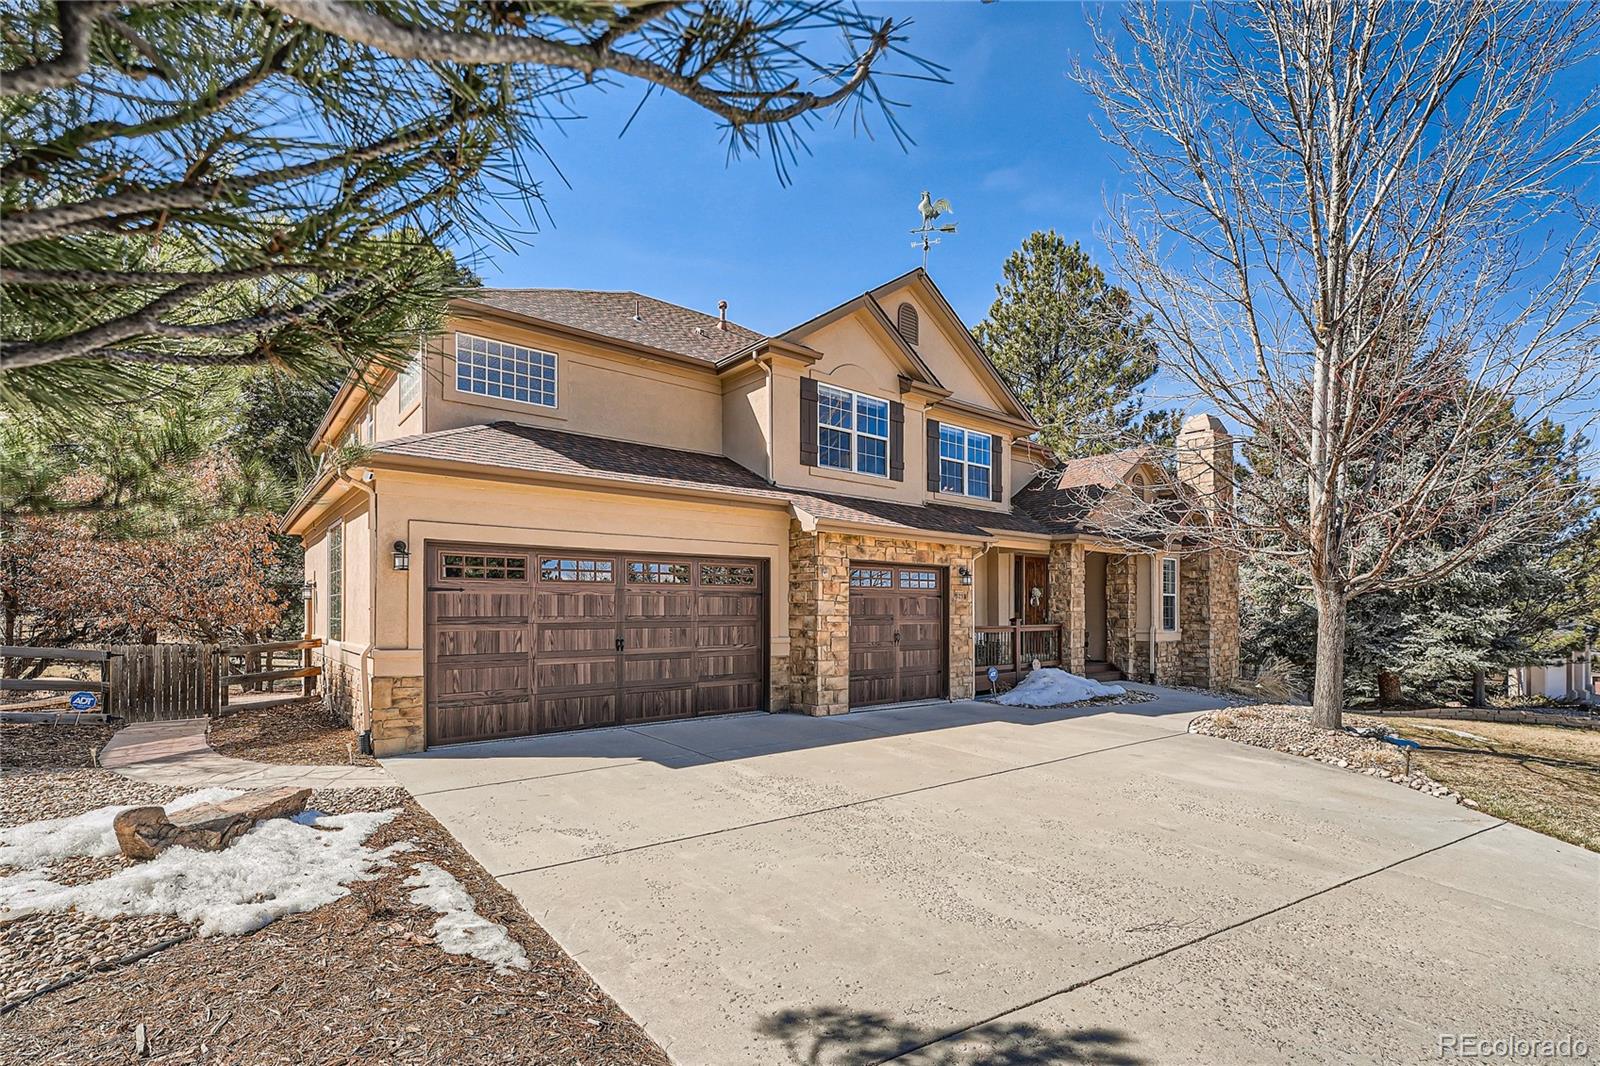 5233  sage thrasher road, parker sold home. Closed on 2024-05-17 for $1,430,000.